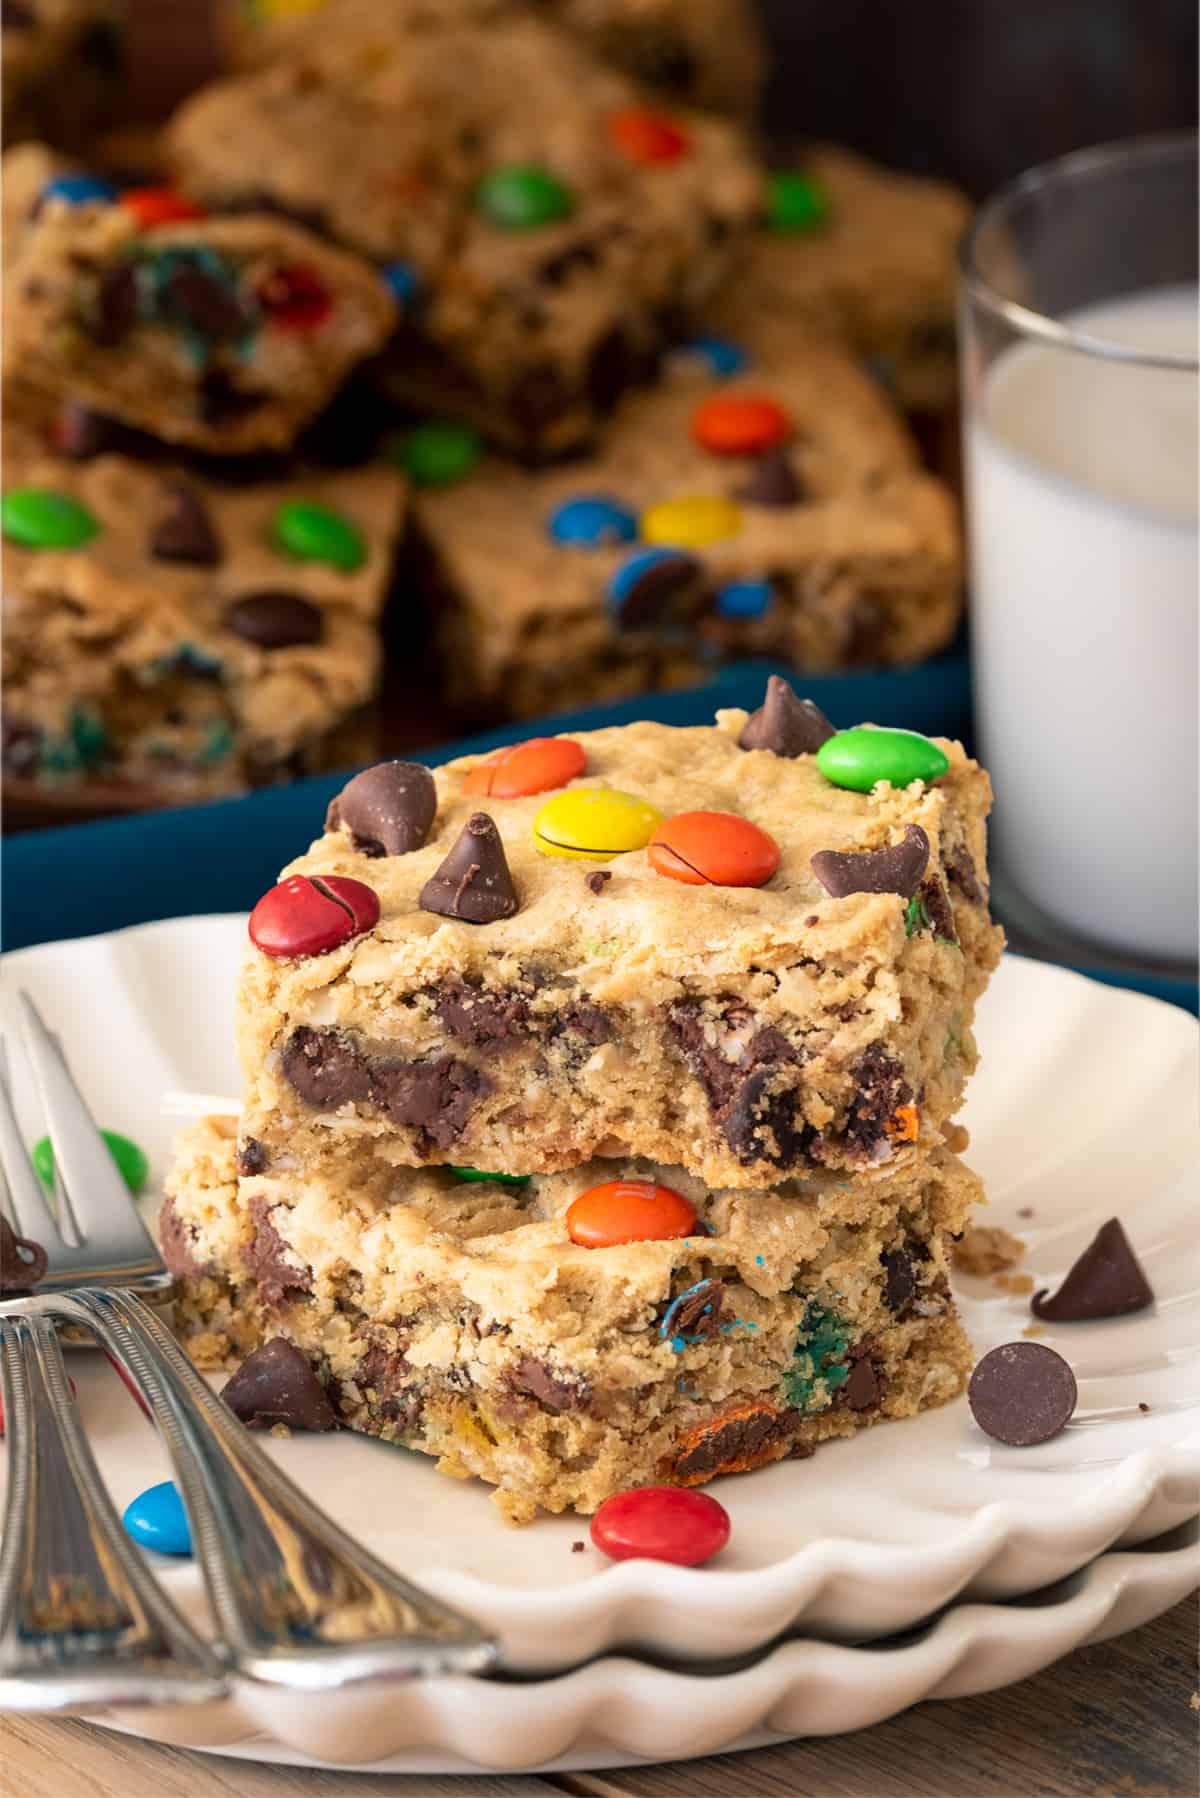 Two oatmeal cookie bars on a plate with a bite taken out to show texture and m&ms and chocolate chips.